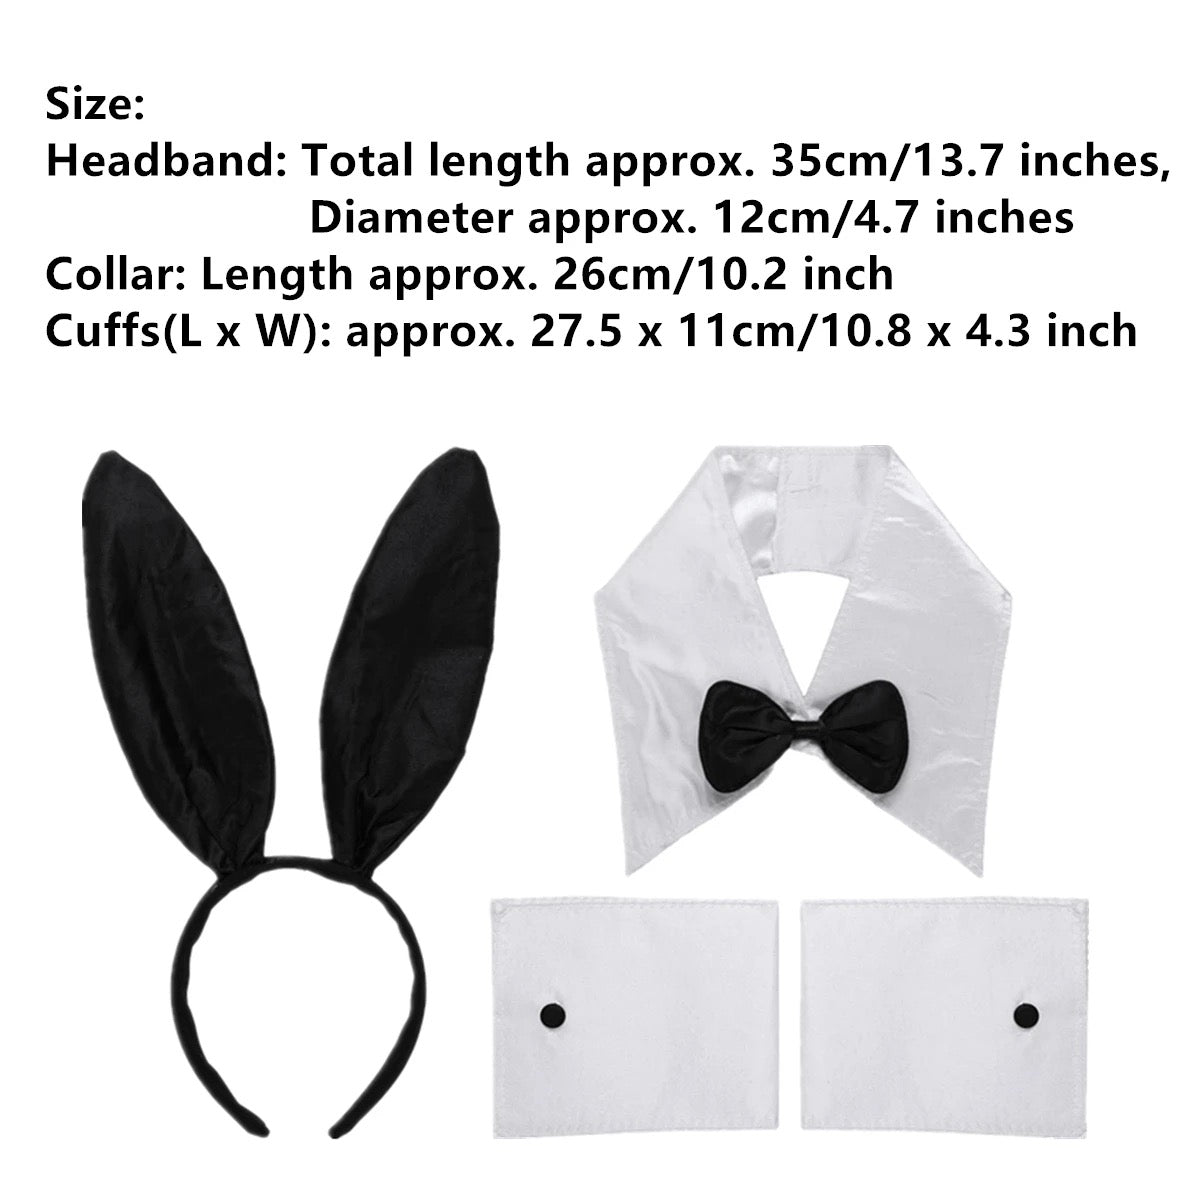 Sexy Playboy Bunny Rabbit Accessories Pack - Cuffs, Ears & Collar Bow Tie